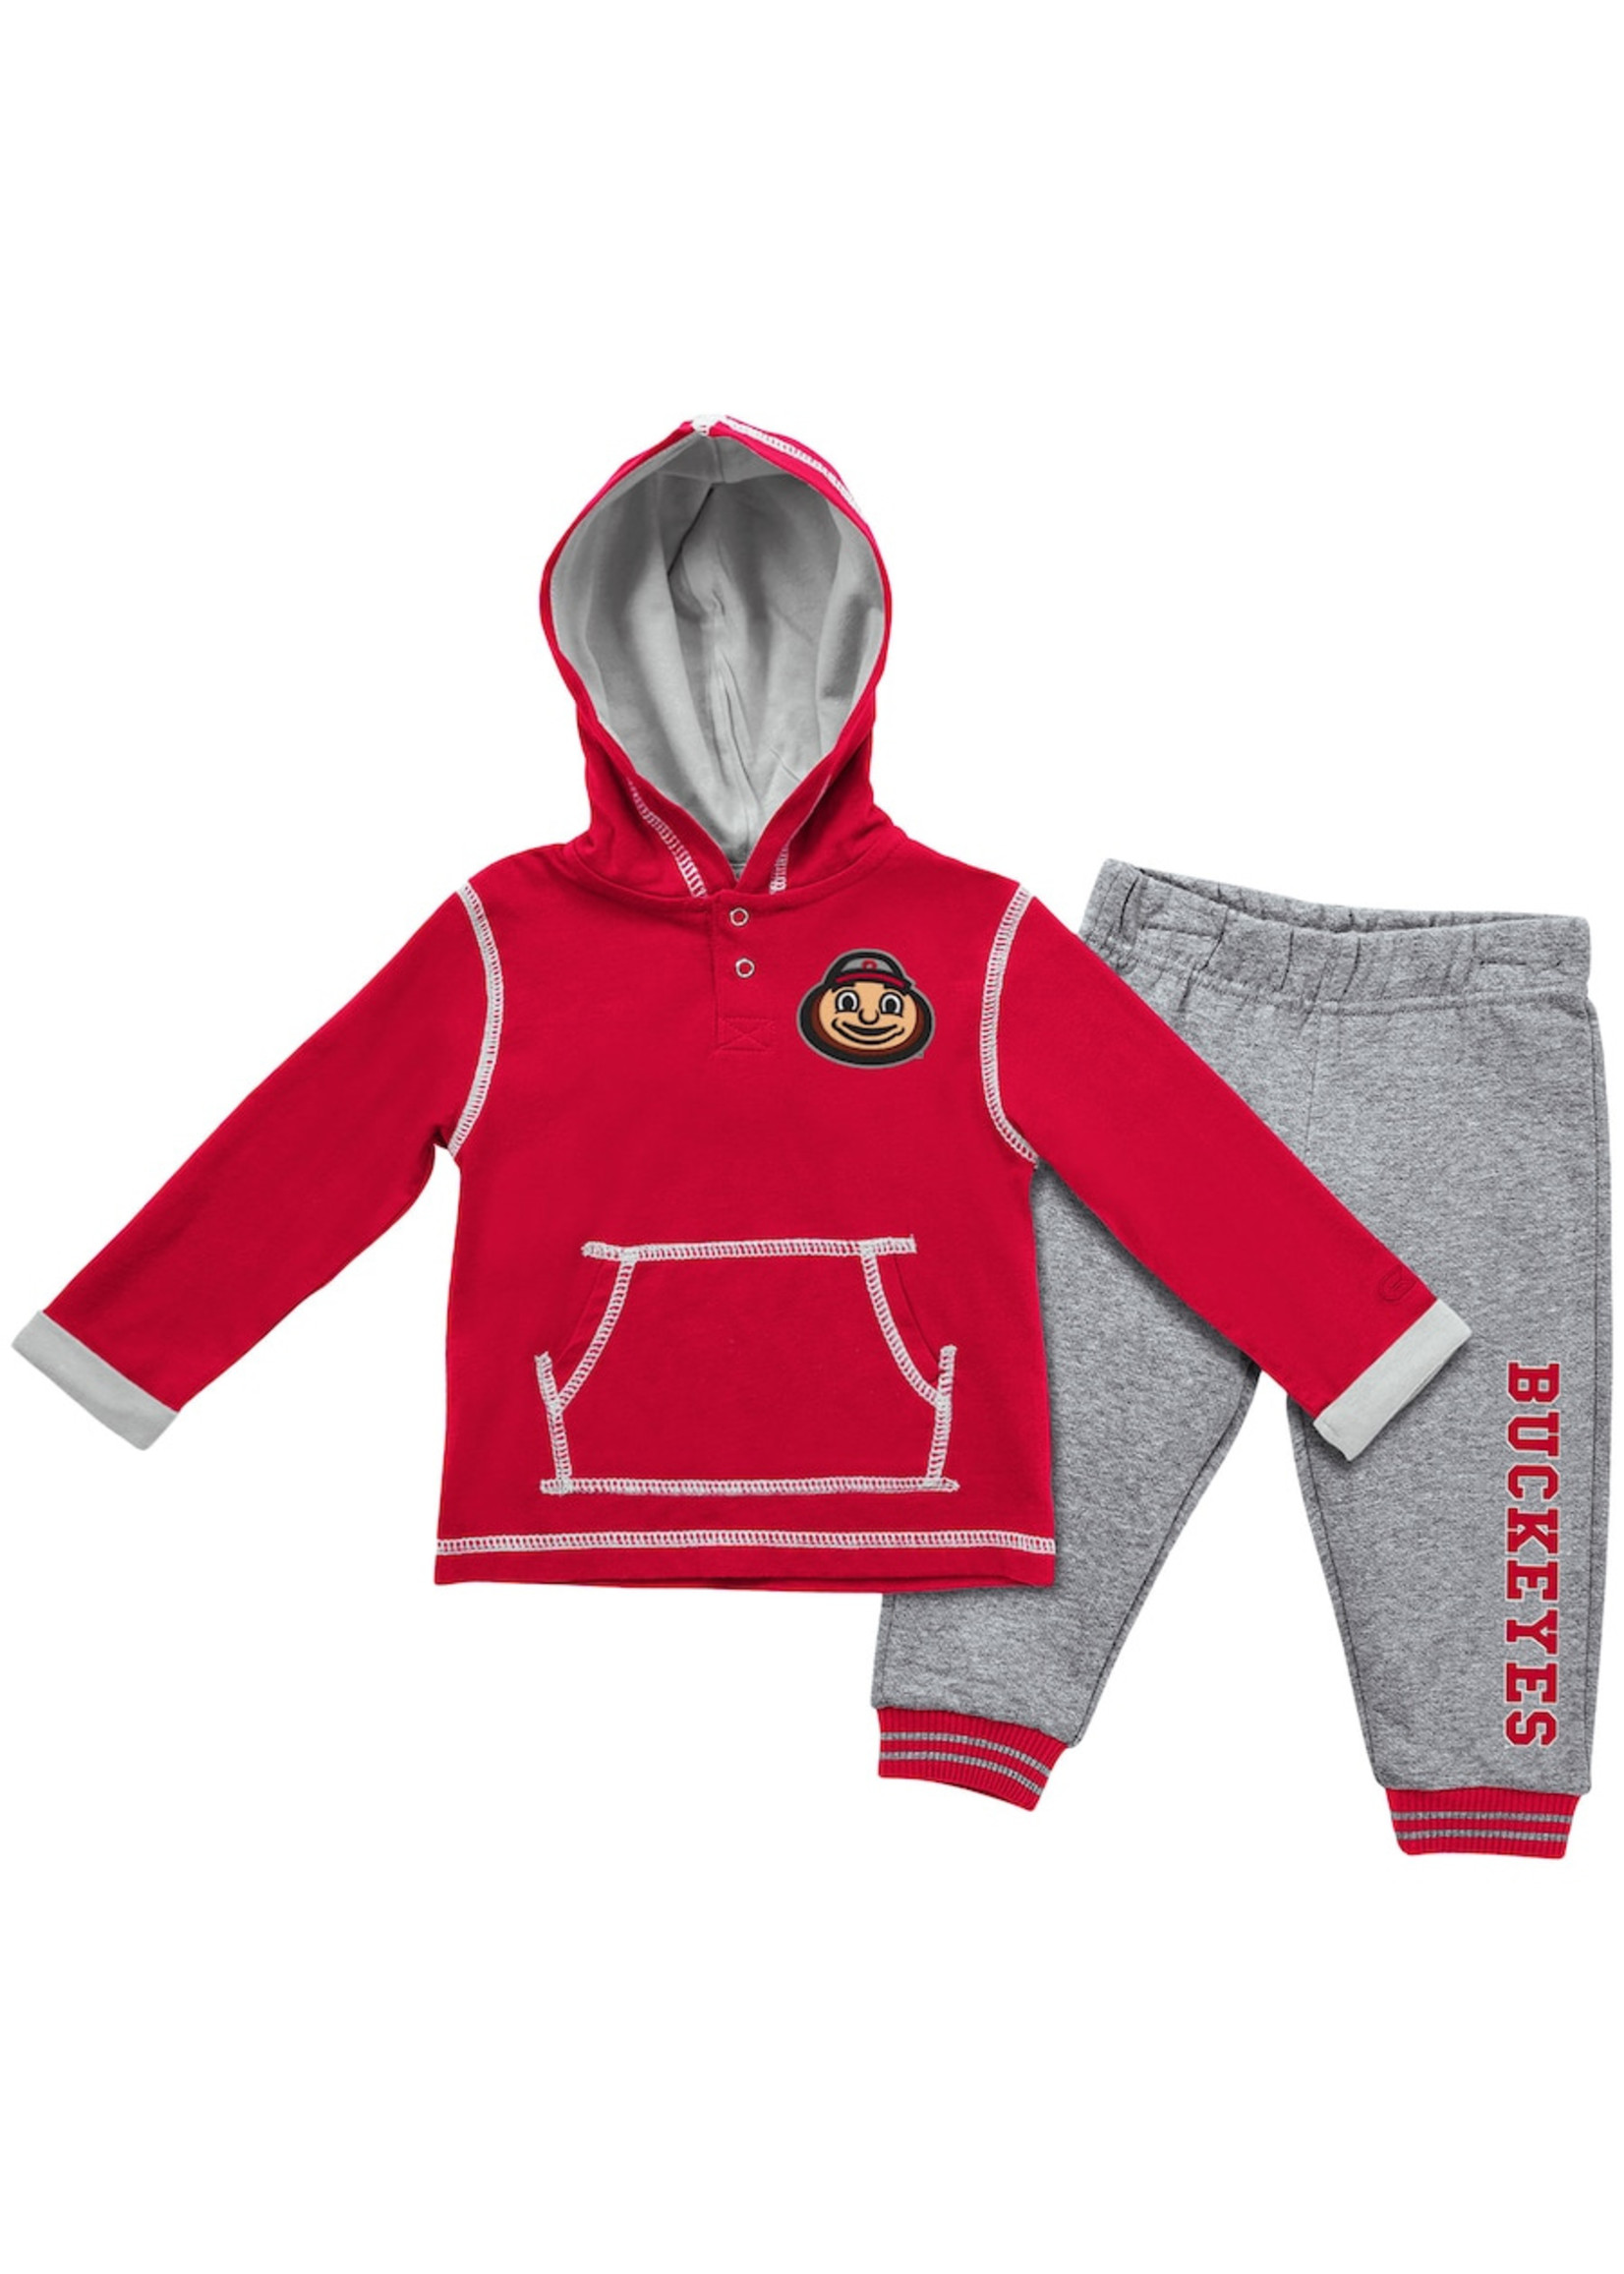 Outerstuff NCAA Ohio State Infant/Toddler Fleece Hoodie